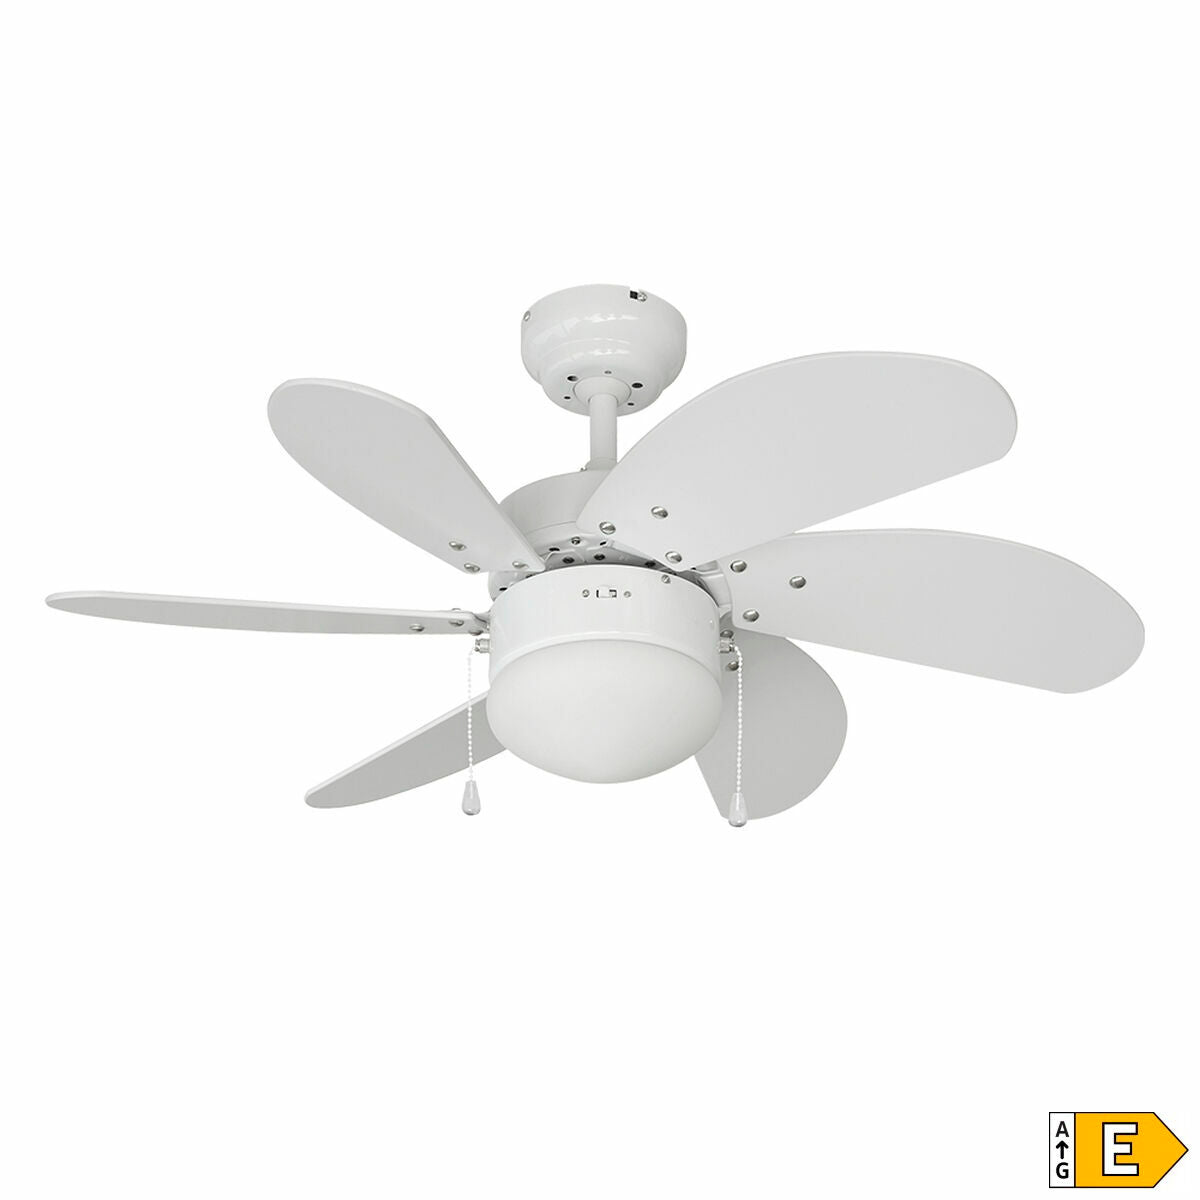 Ceiling Fan with Light EDM 33985 Aral White 50 W, EDM, Lighting, Indoor lighting, ceiling-fan-with-light-edm-33985-aral-white-50-w, Brand_EDM, category-reference-2399, category-reference-2450, category-reference-2451, category-reference-t-10333, category-reference-t-10347, category-reference-t-19657, Condition_NEW, led / lighting, Price_100 - 200, small electric appliances, summer, RiotNook